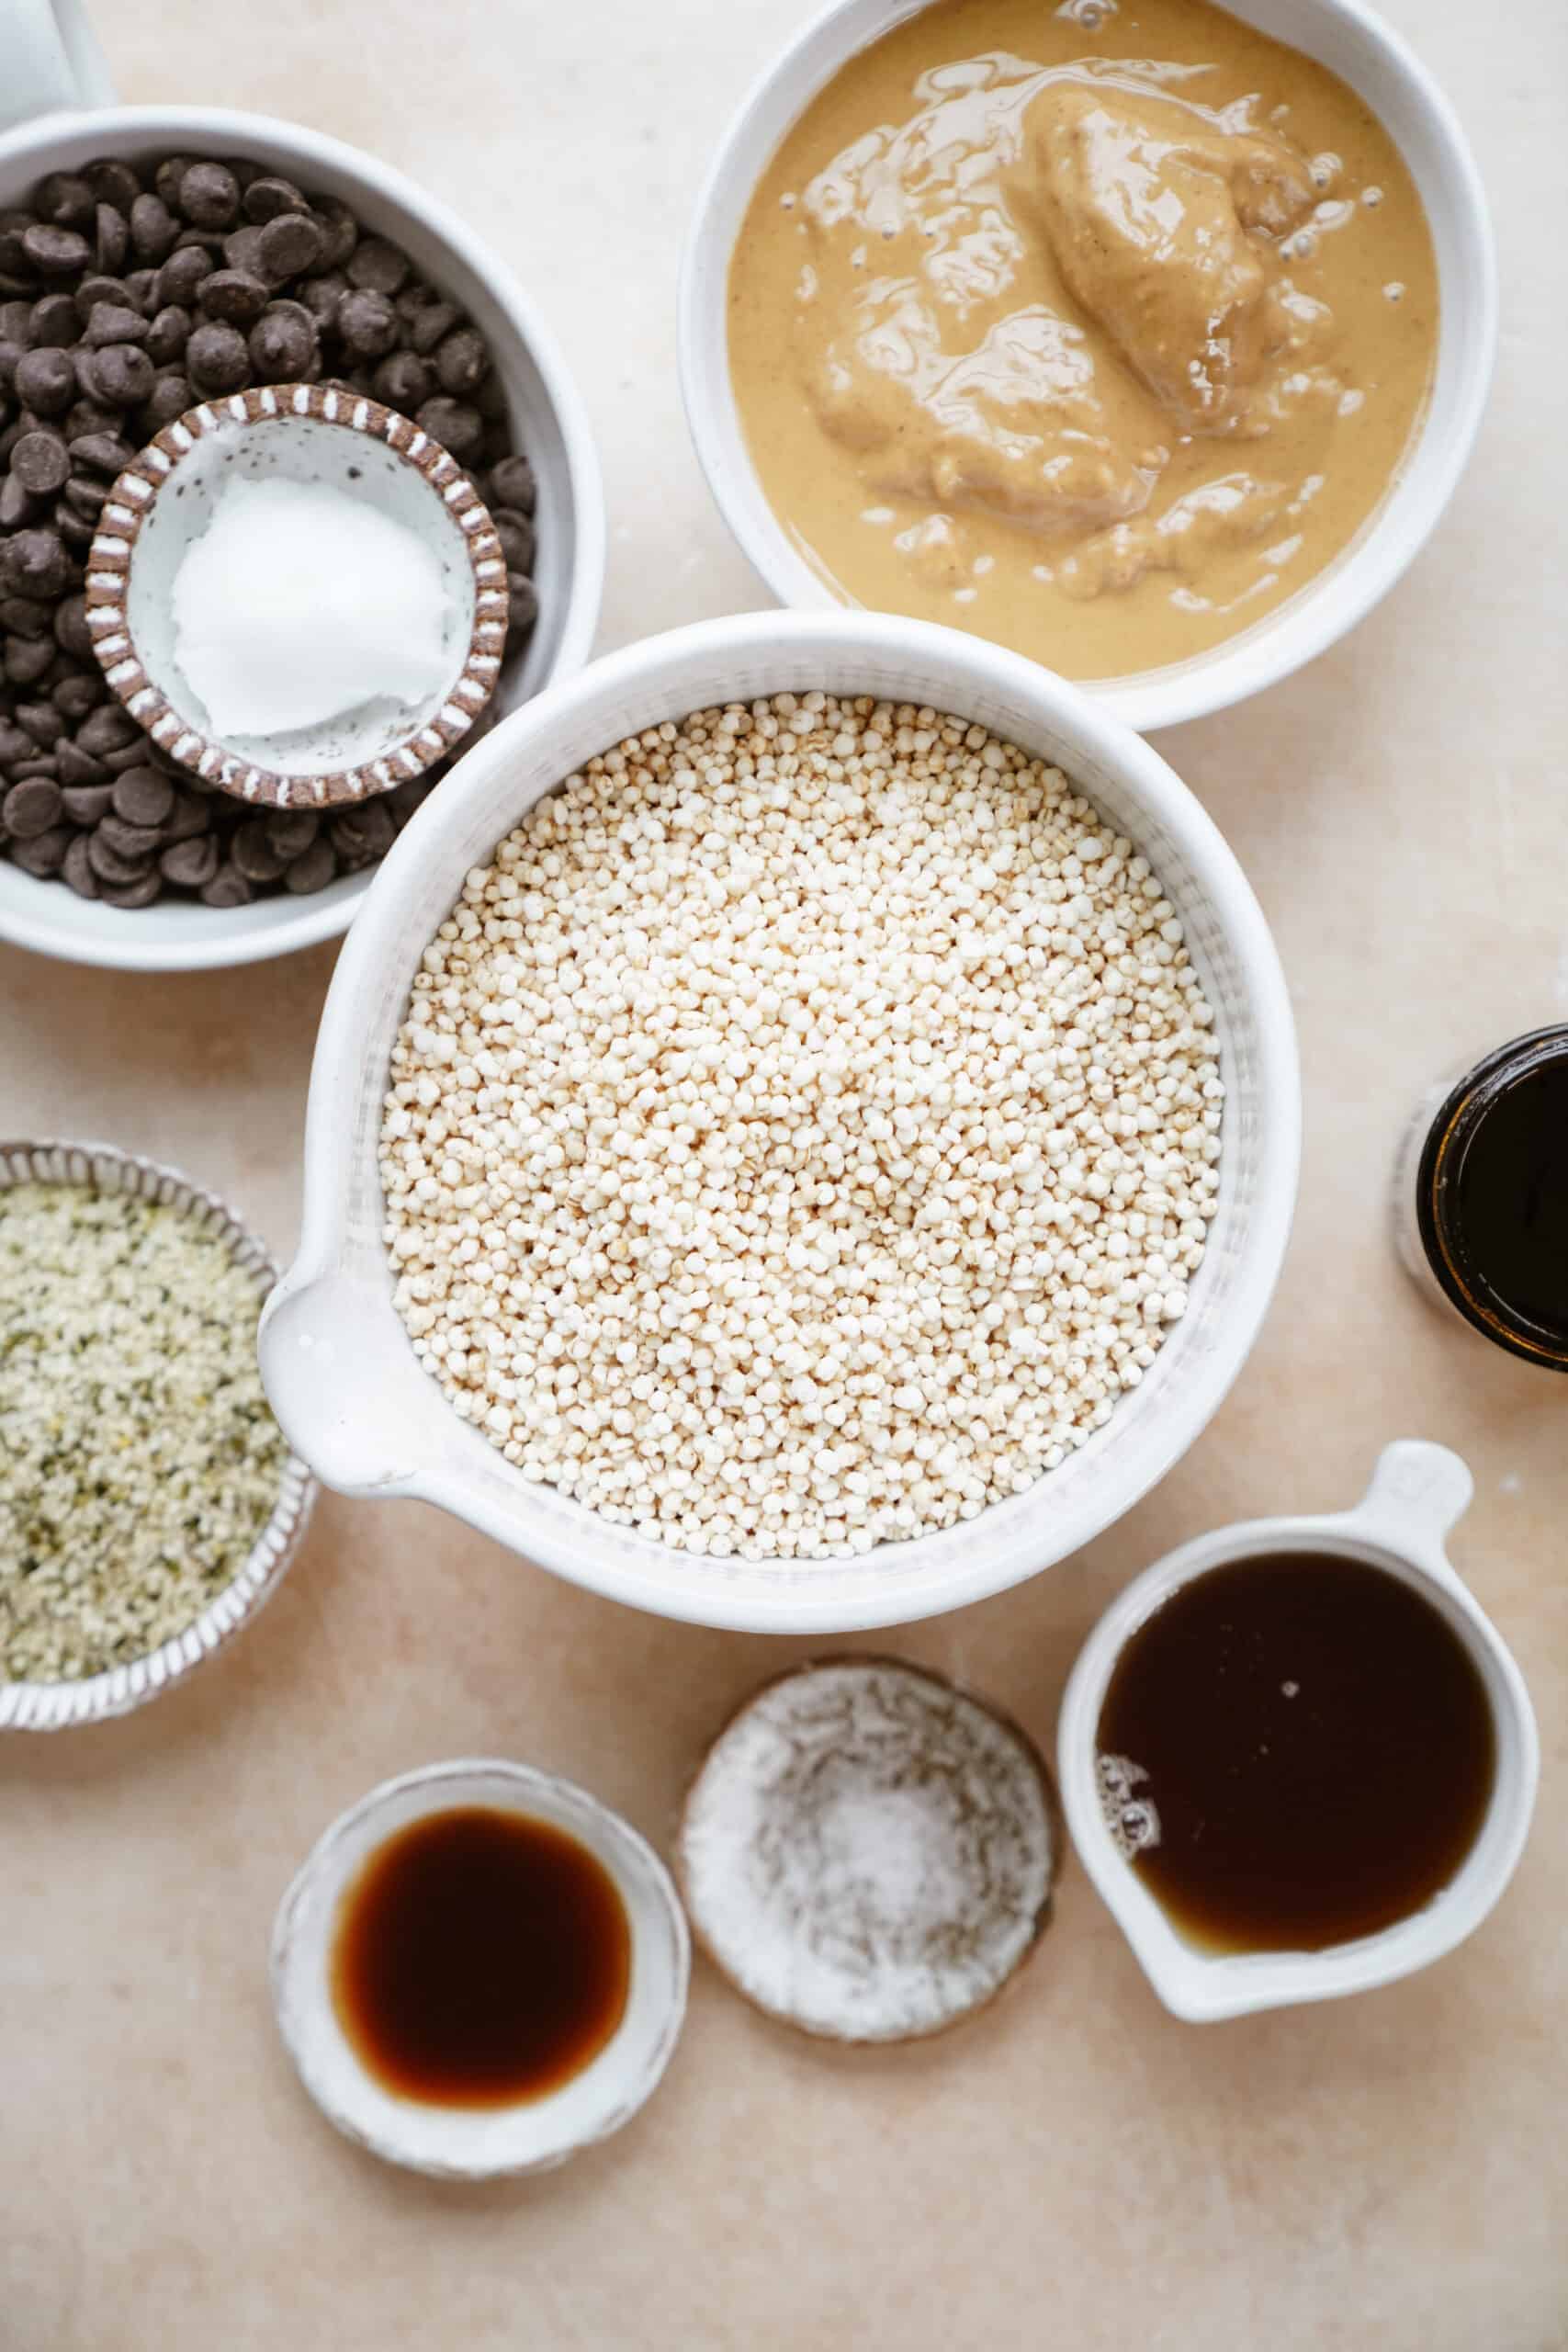 Ingredients for puffed quinoa bars